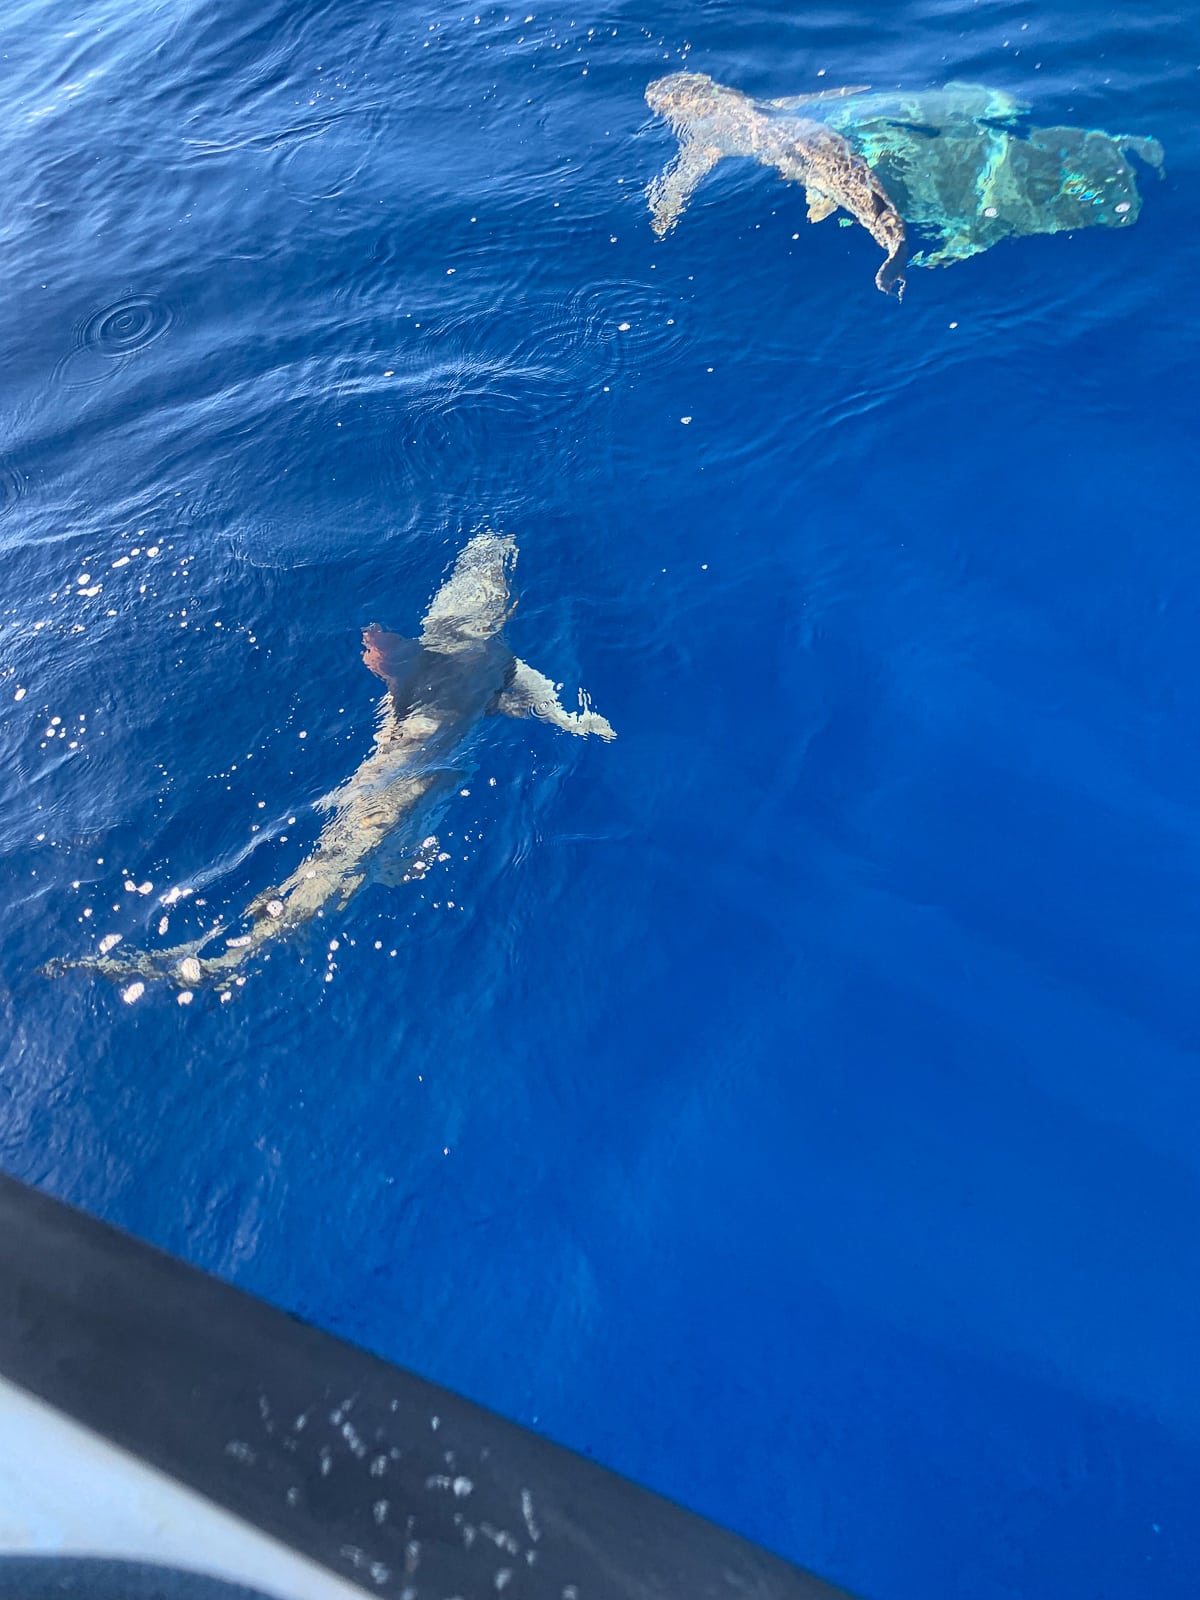 The sharks outside of our boat.